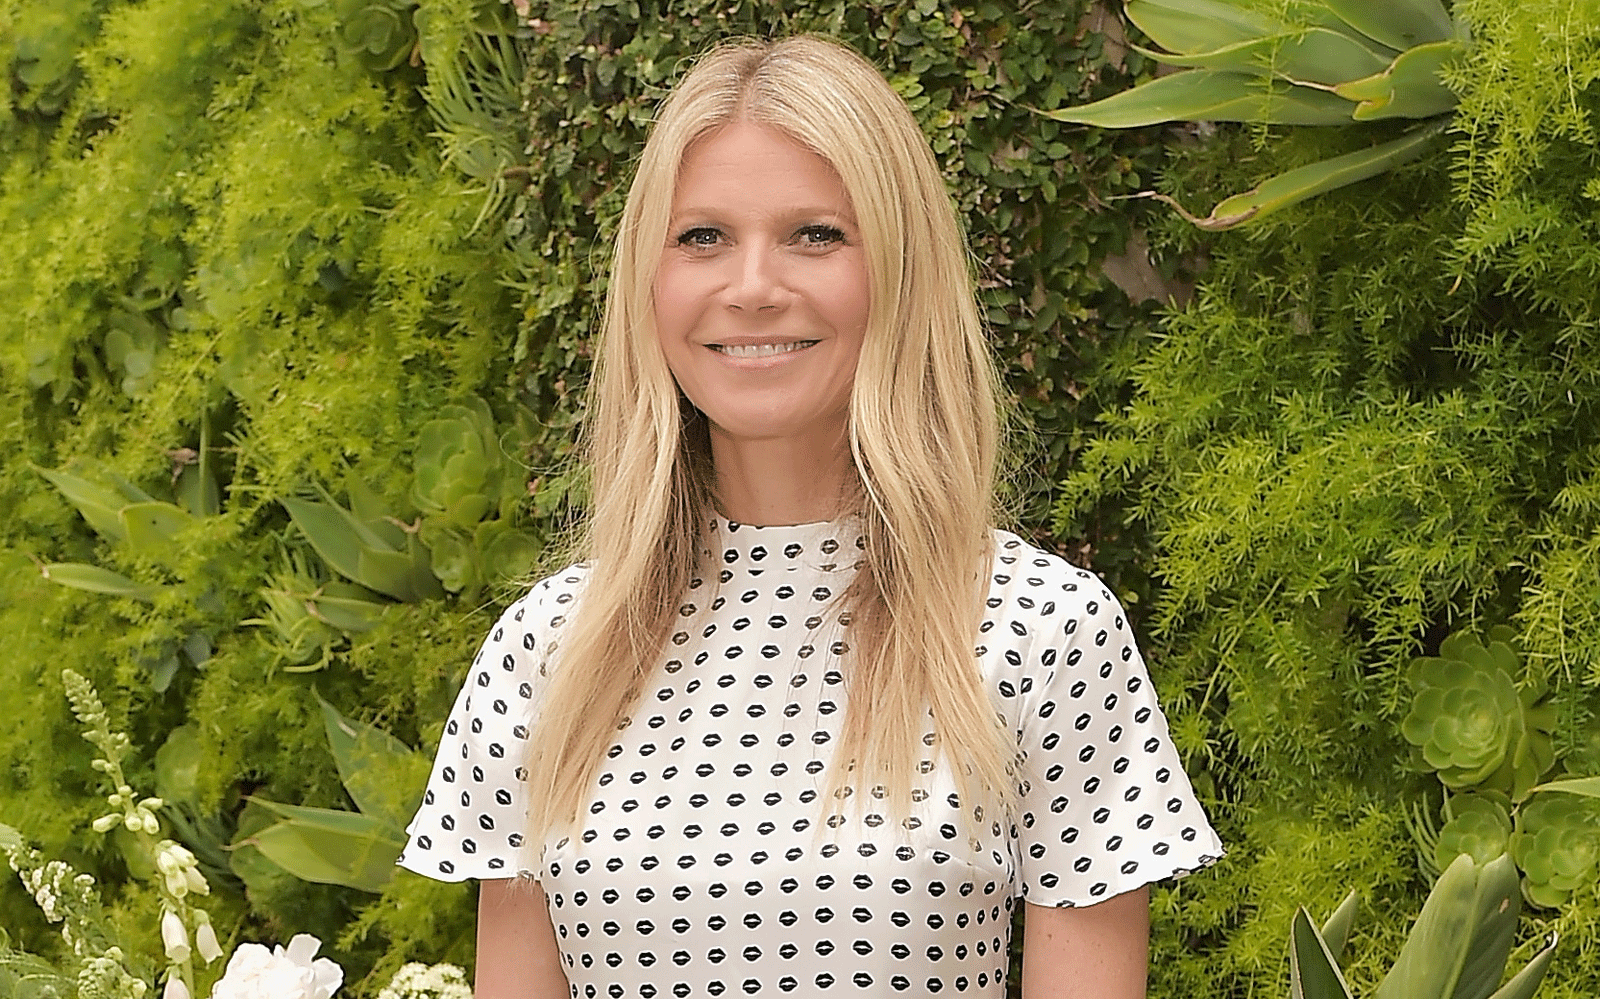 Gwyneth Paltrow's Goop Is Partnering With Celebrity Cruises for a Wellness Trip. Travel + Leisure